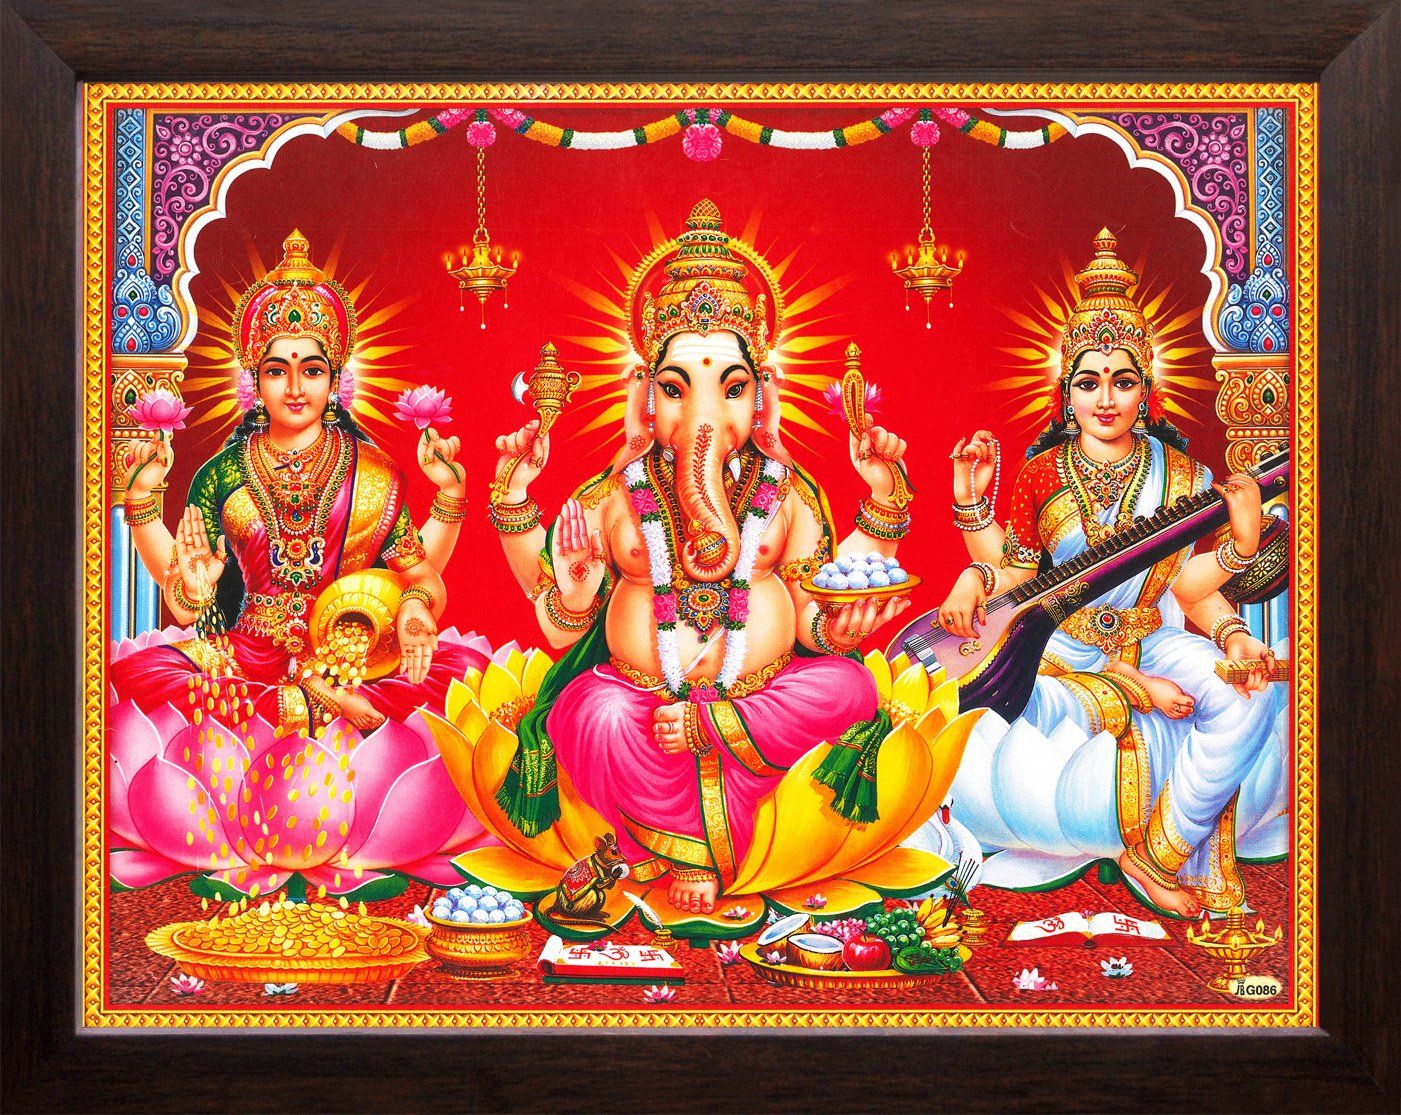 Art n Store Mata Lakshmi with Devi Saraswati and Lord Ganesha HD Printed Acrylic Sheet Picture with MDF Board Frame (30 X 23.5 X 1.5 cm, Brown): Amazon.in: Home & Kitchen